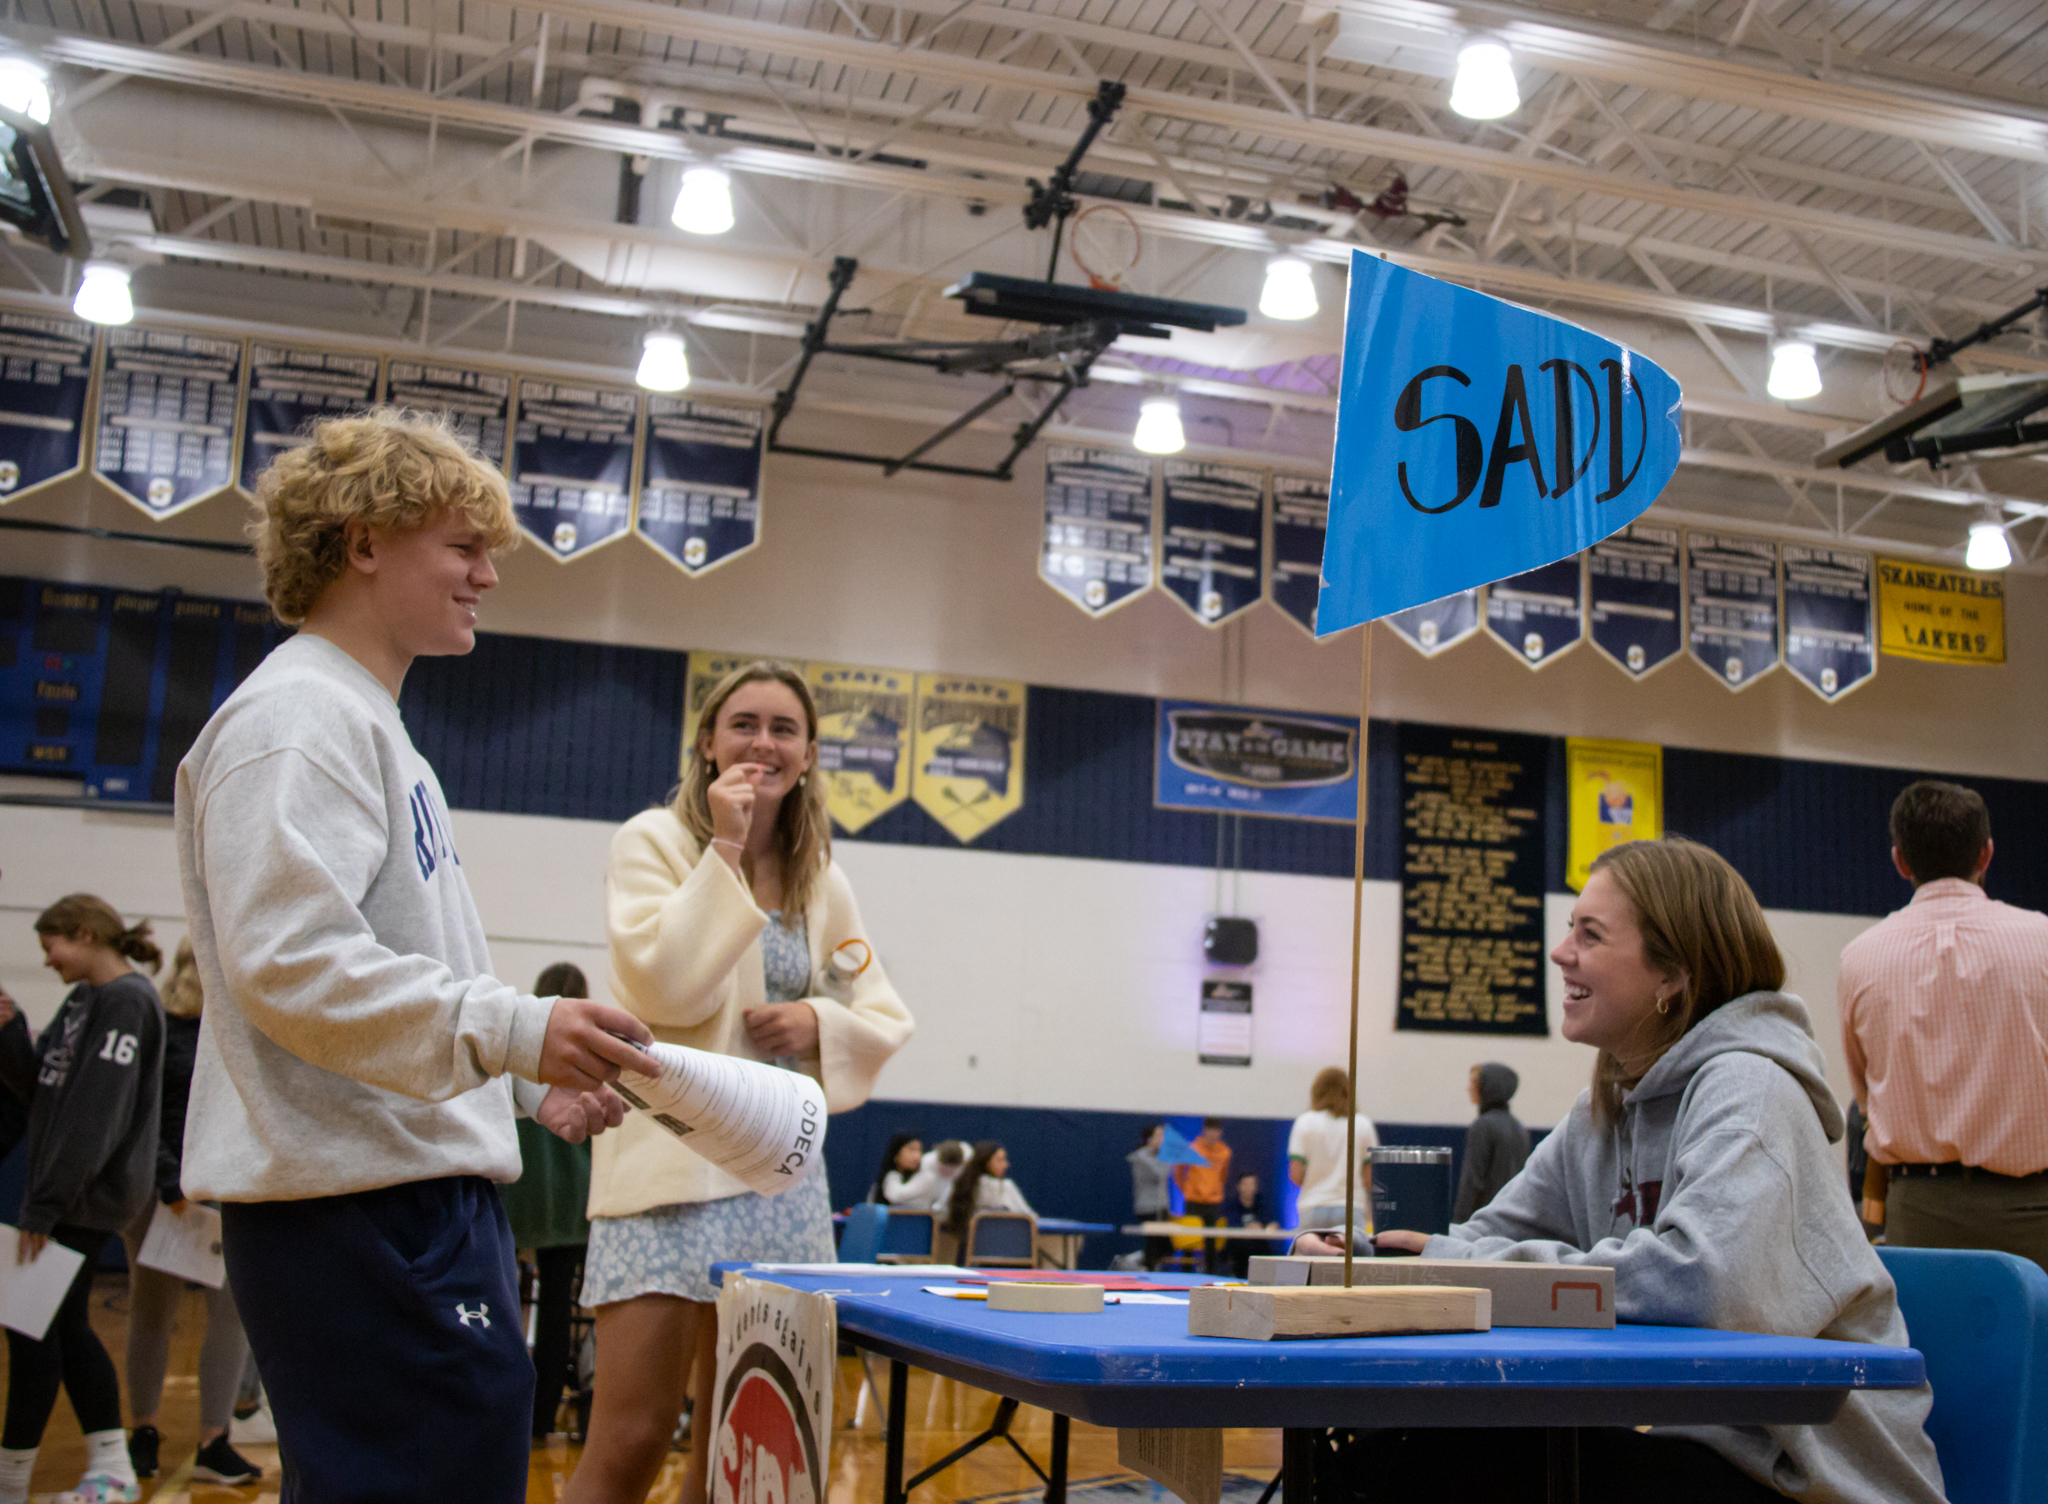 Students connect at the Students Against Destructive Decisions (SADD) Table